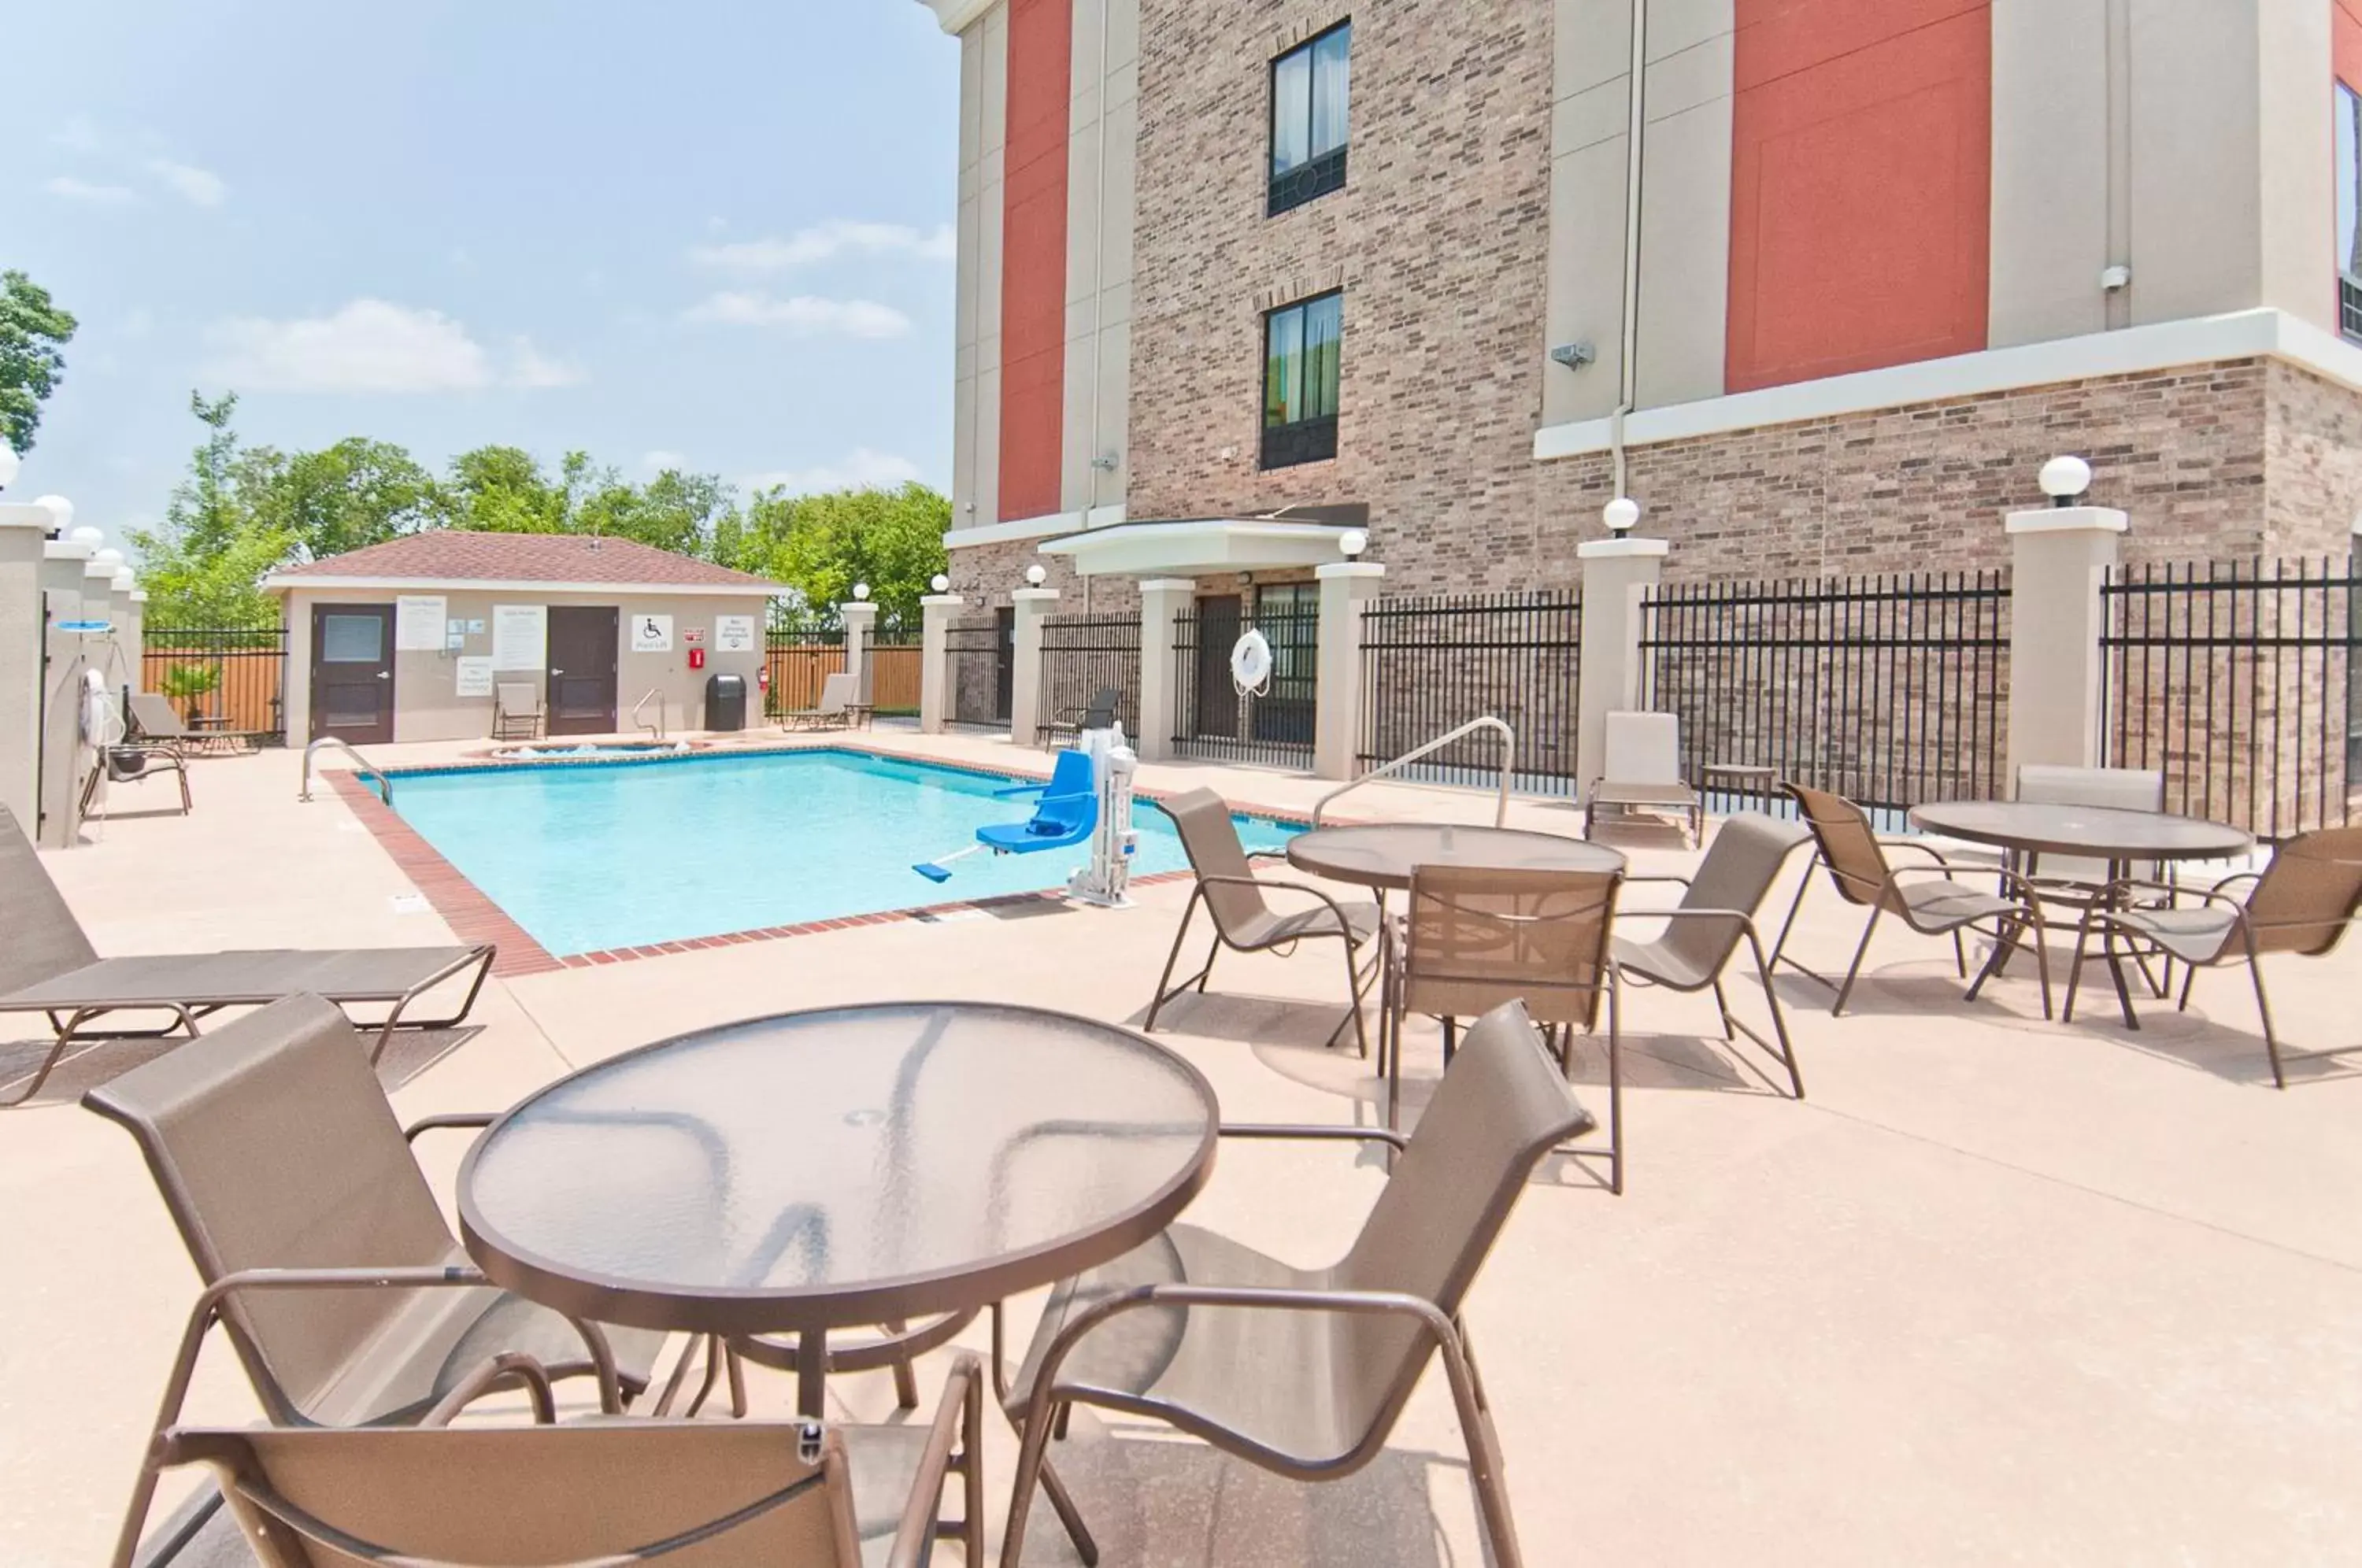 Swimming Pool in Holiday Inn Express & Suites San Antonio SE by AT&T Center, an IHG Hotel